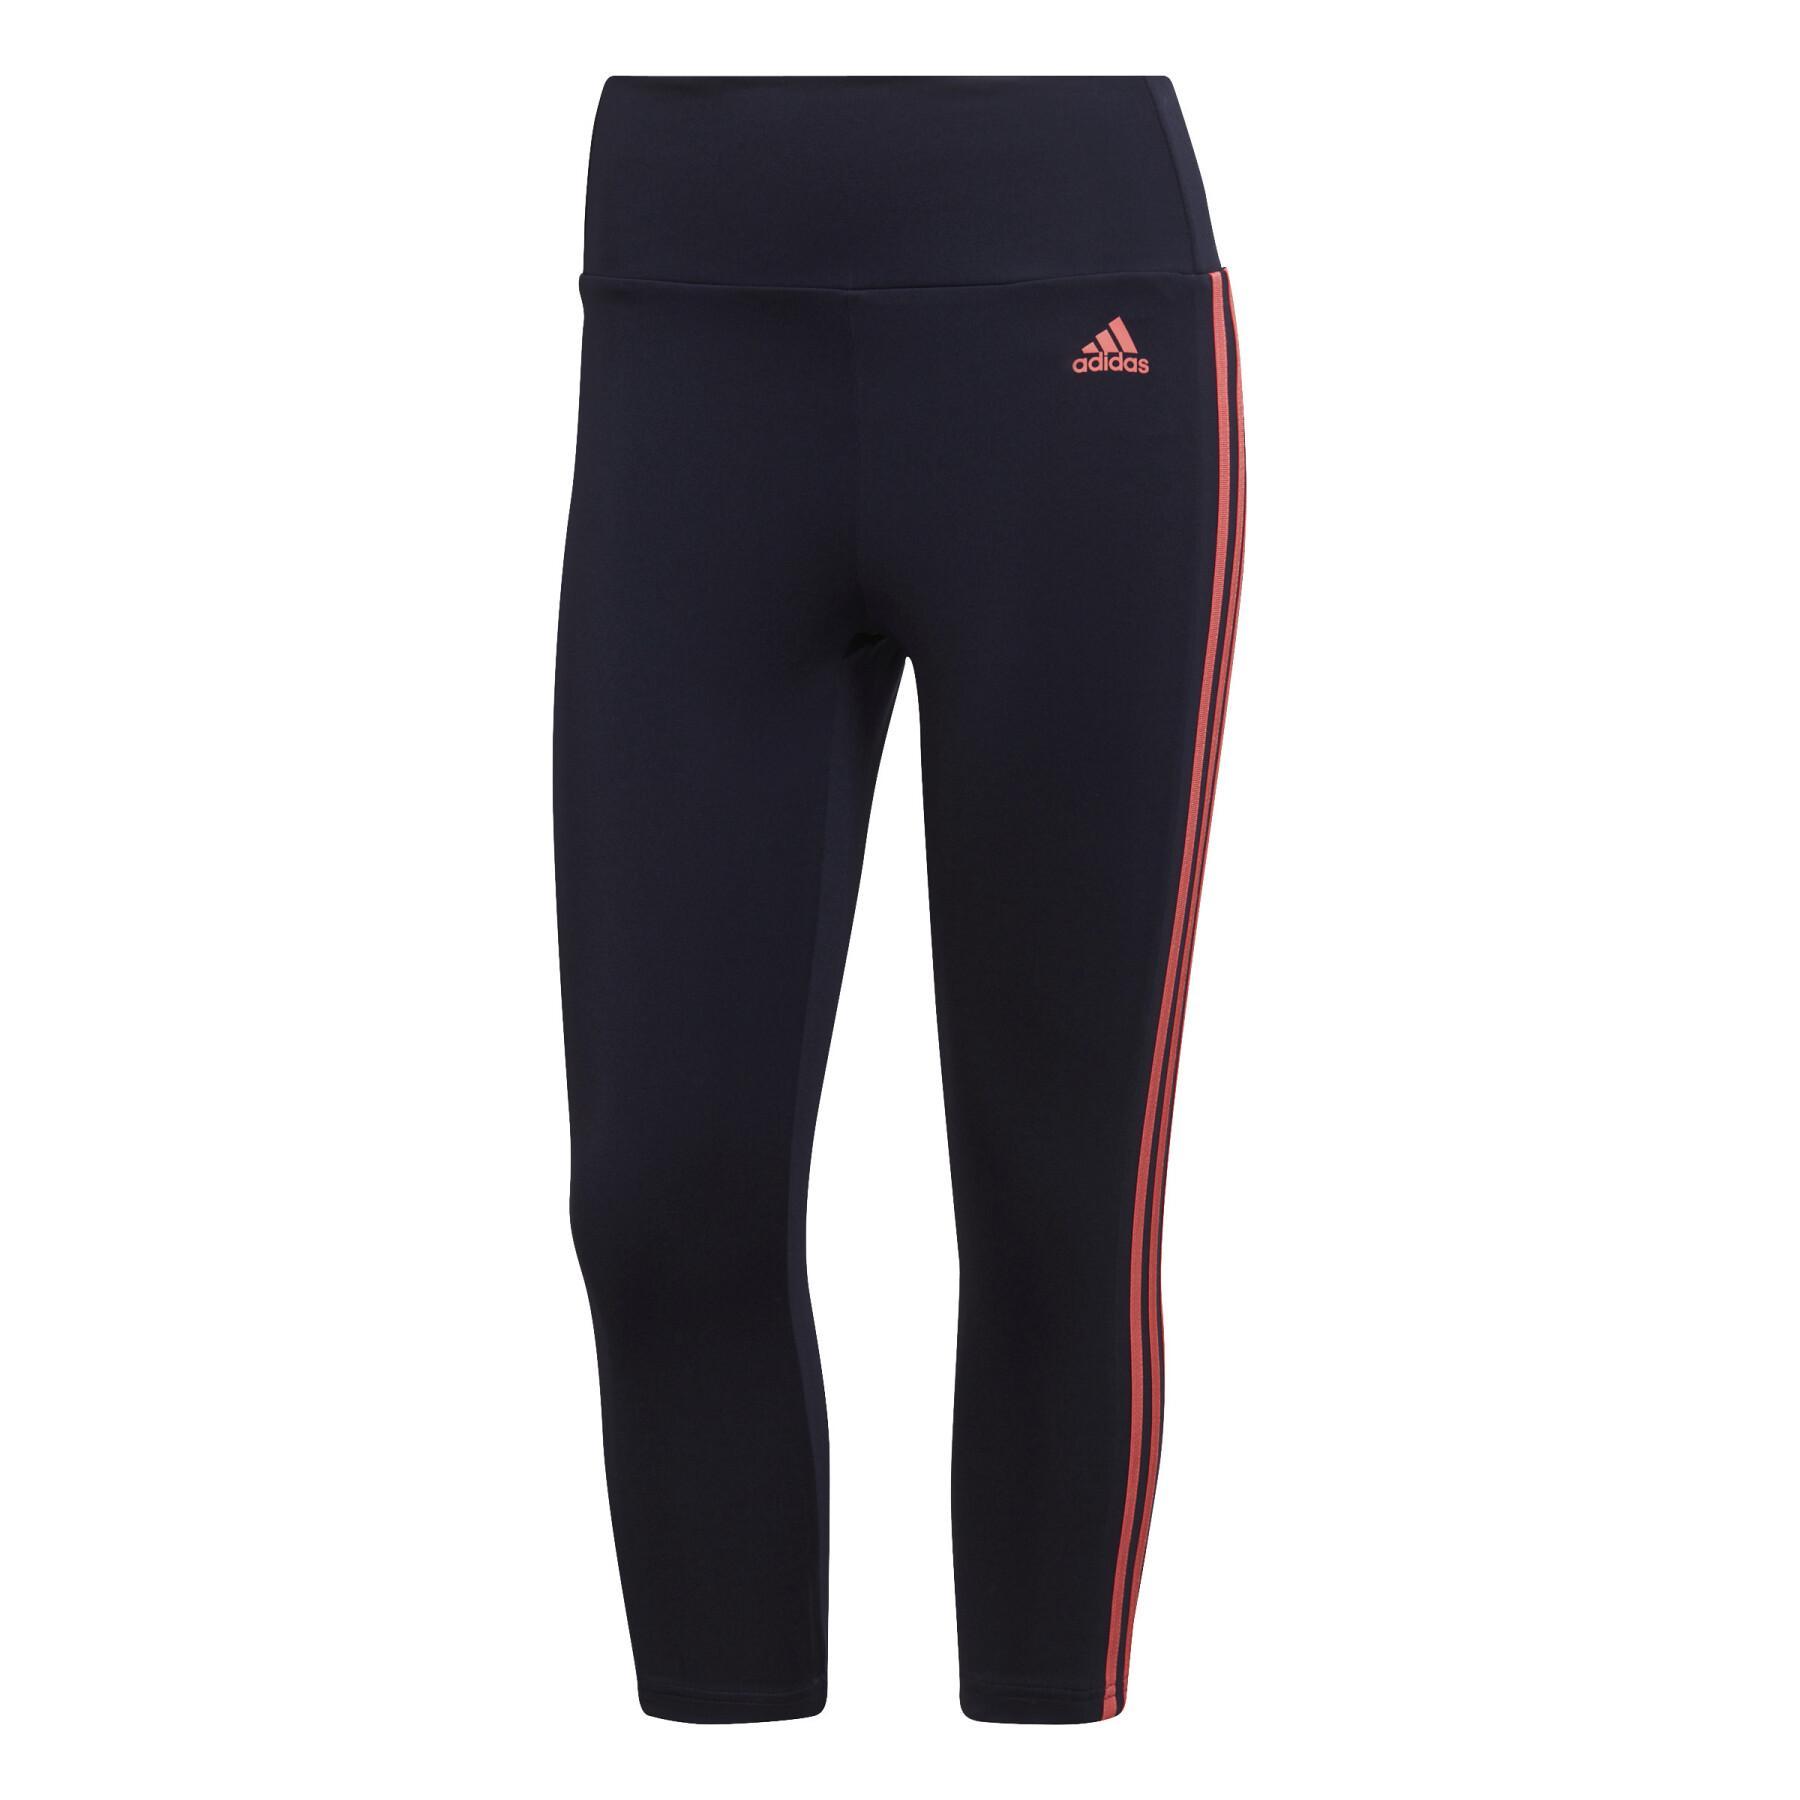 Legging woman adidas Designed To Move High-Rise 3-Stripes 3/4 Sport